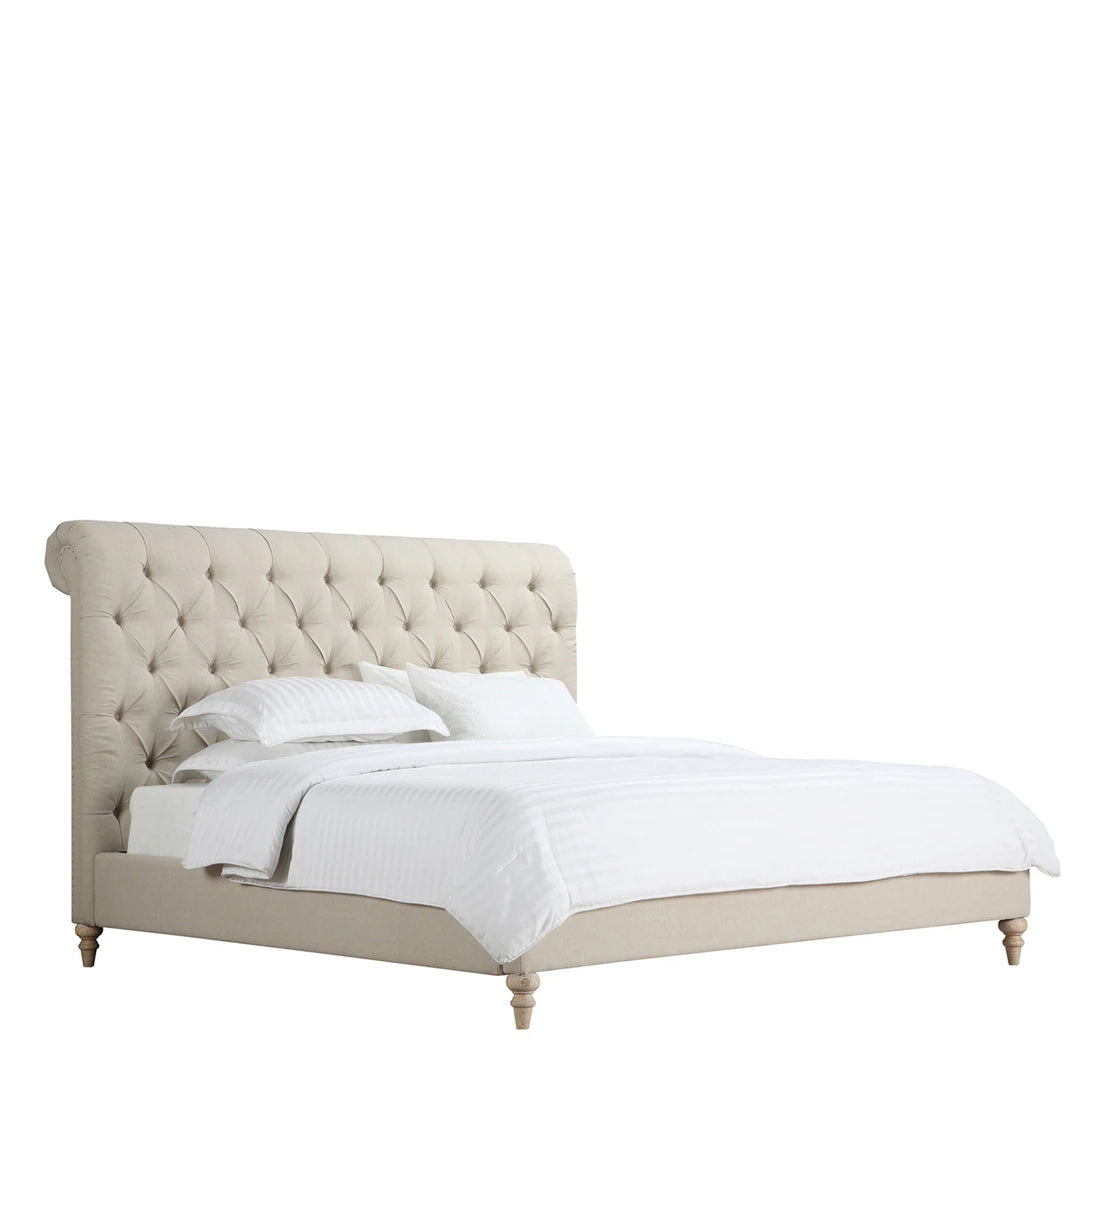 Leo Fabric Upholstered King Size Bed in Beige Colour